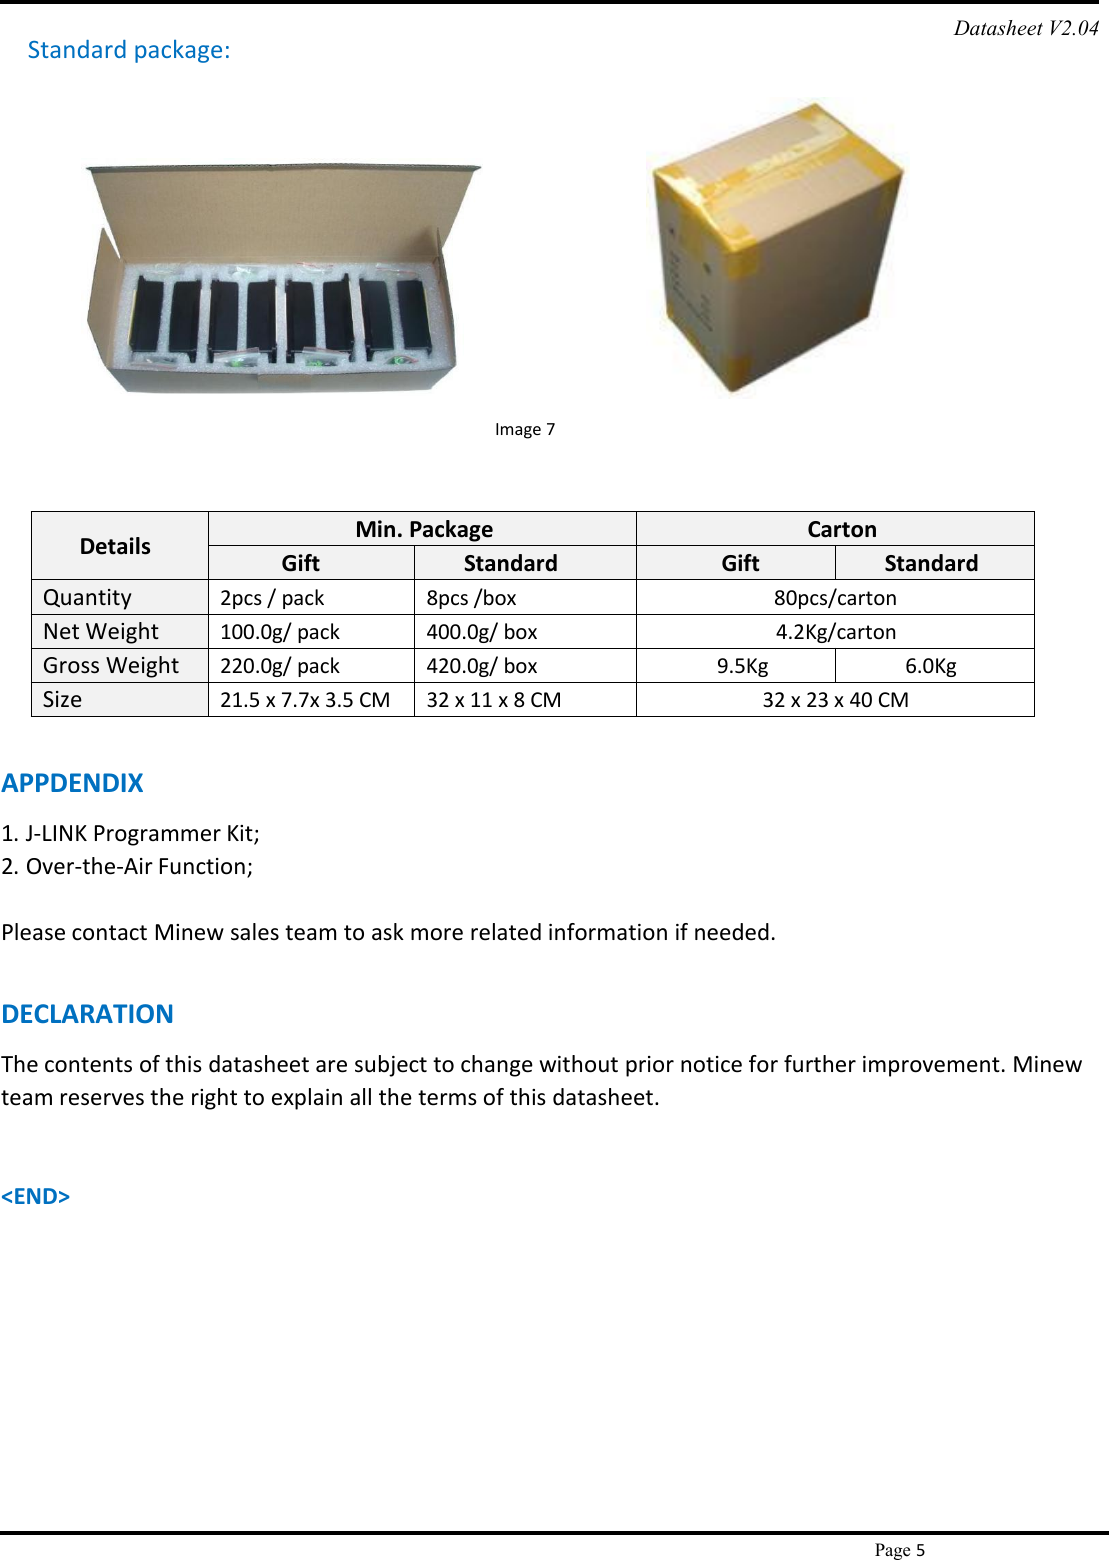 Page 5Standard package:Image 7Datasheet V2.04DetailsMin. PackageCartonGiftStandardGiftStandardQuantity2pcs / pack8pcs /box80pcs/cartonNet Weight100.0g/ pack400.0g/ box4.2Kg/cartonGross Weight220.0g/ pack420.0g/ box9.5Kg6.0KgSize21.5 x 7.7x 3.5 CM32 x 11 x 8 CM32 x 23 x 40 CMAPPDENDIX1. J-LINK Programmer Kit;2. Over-the-Air Function;Please contact Minew sales team to ask more related information if needed.DECLARATIONThe contents of this datasheet are subject to change without prior notice for further improvement. Minewteam reserves the right to explain all the terms of this datasheet.&lt;END&gt;